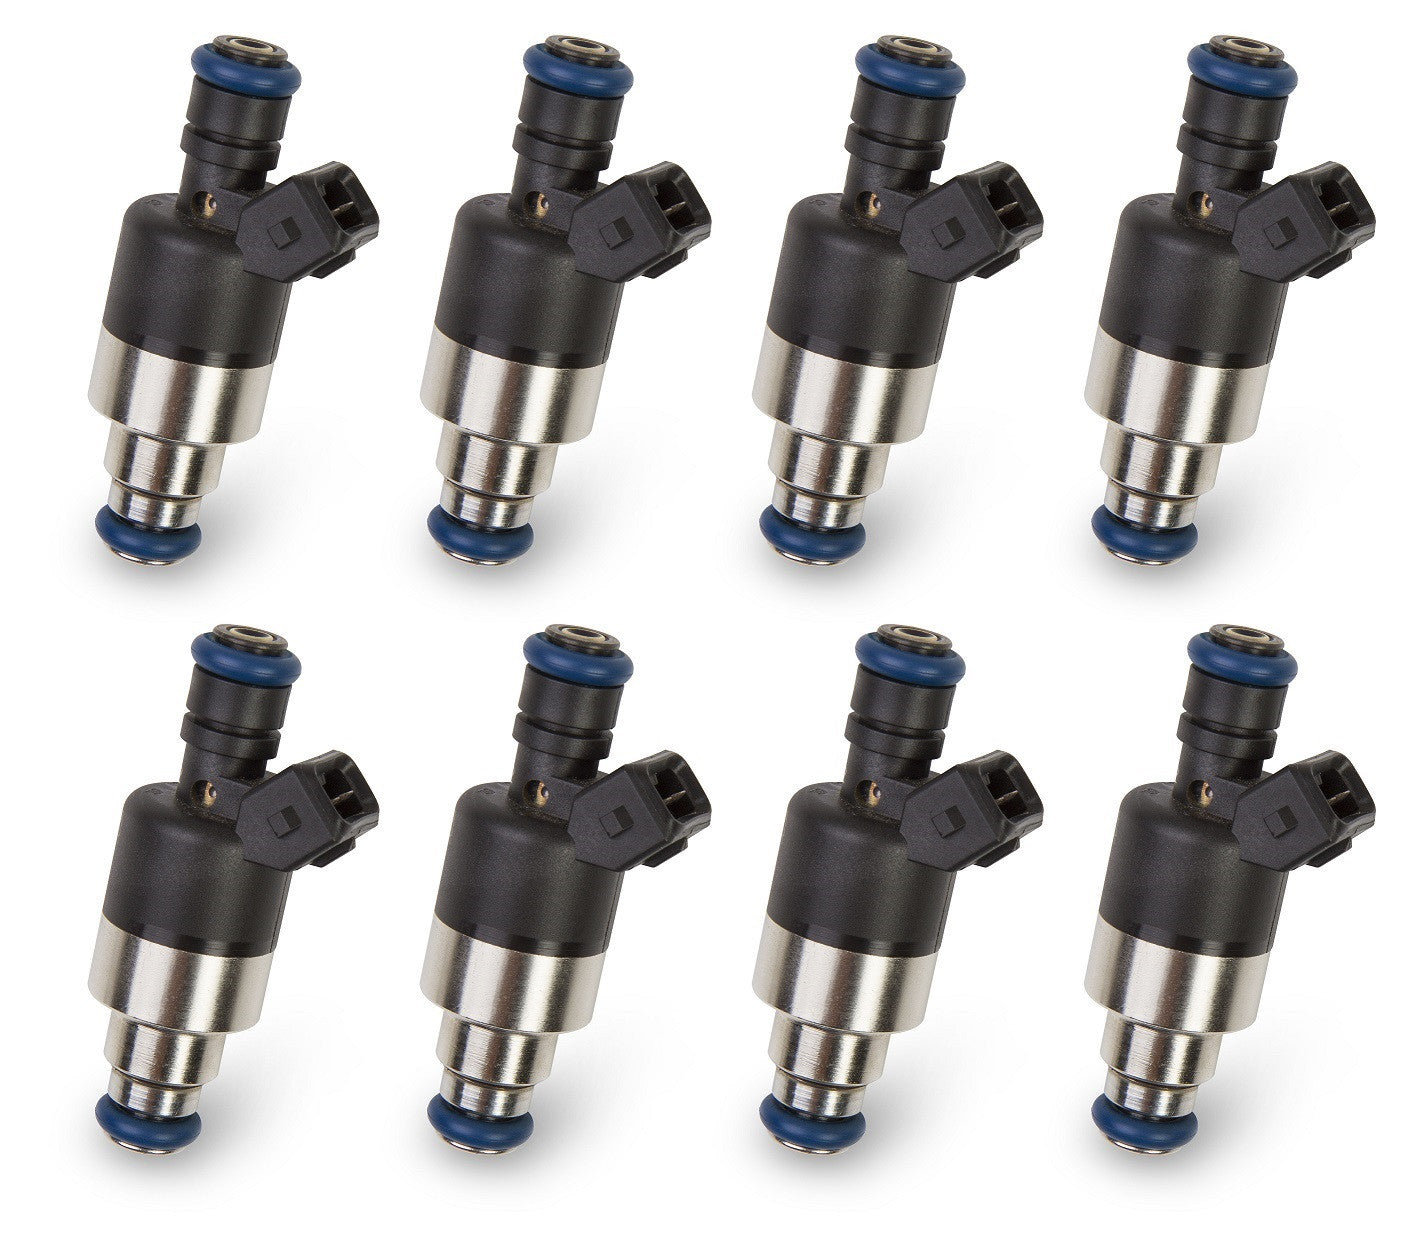 KIT- FUEL INJECTOR 42 PPH, 8 PACK (Up to 670 HP N/A or 510 HP Boosted on Gasoline)